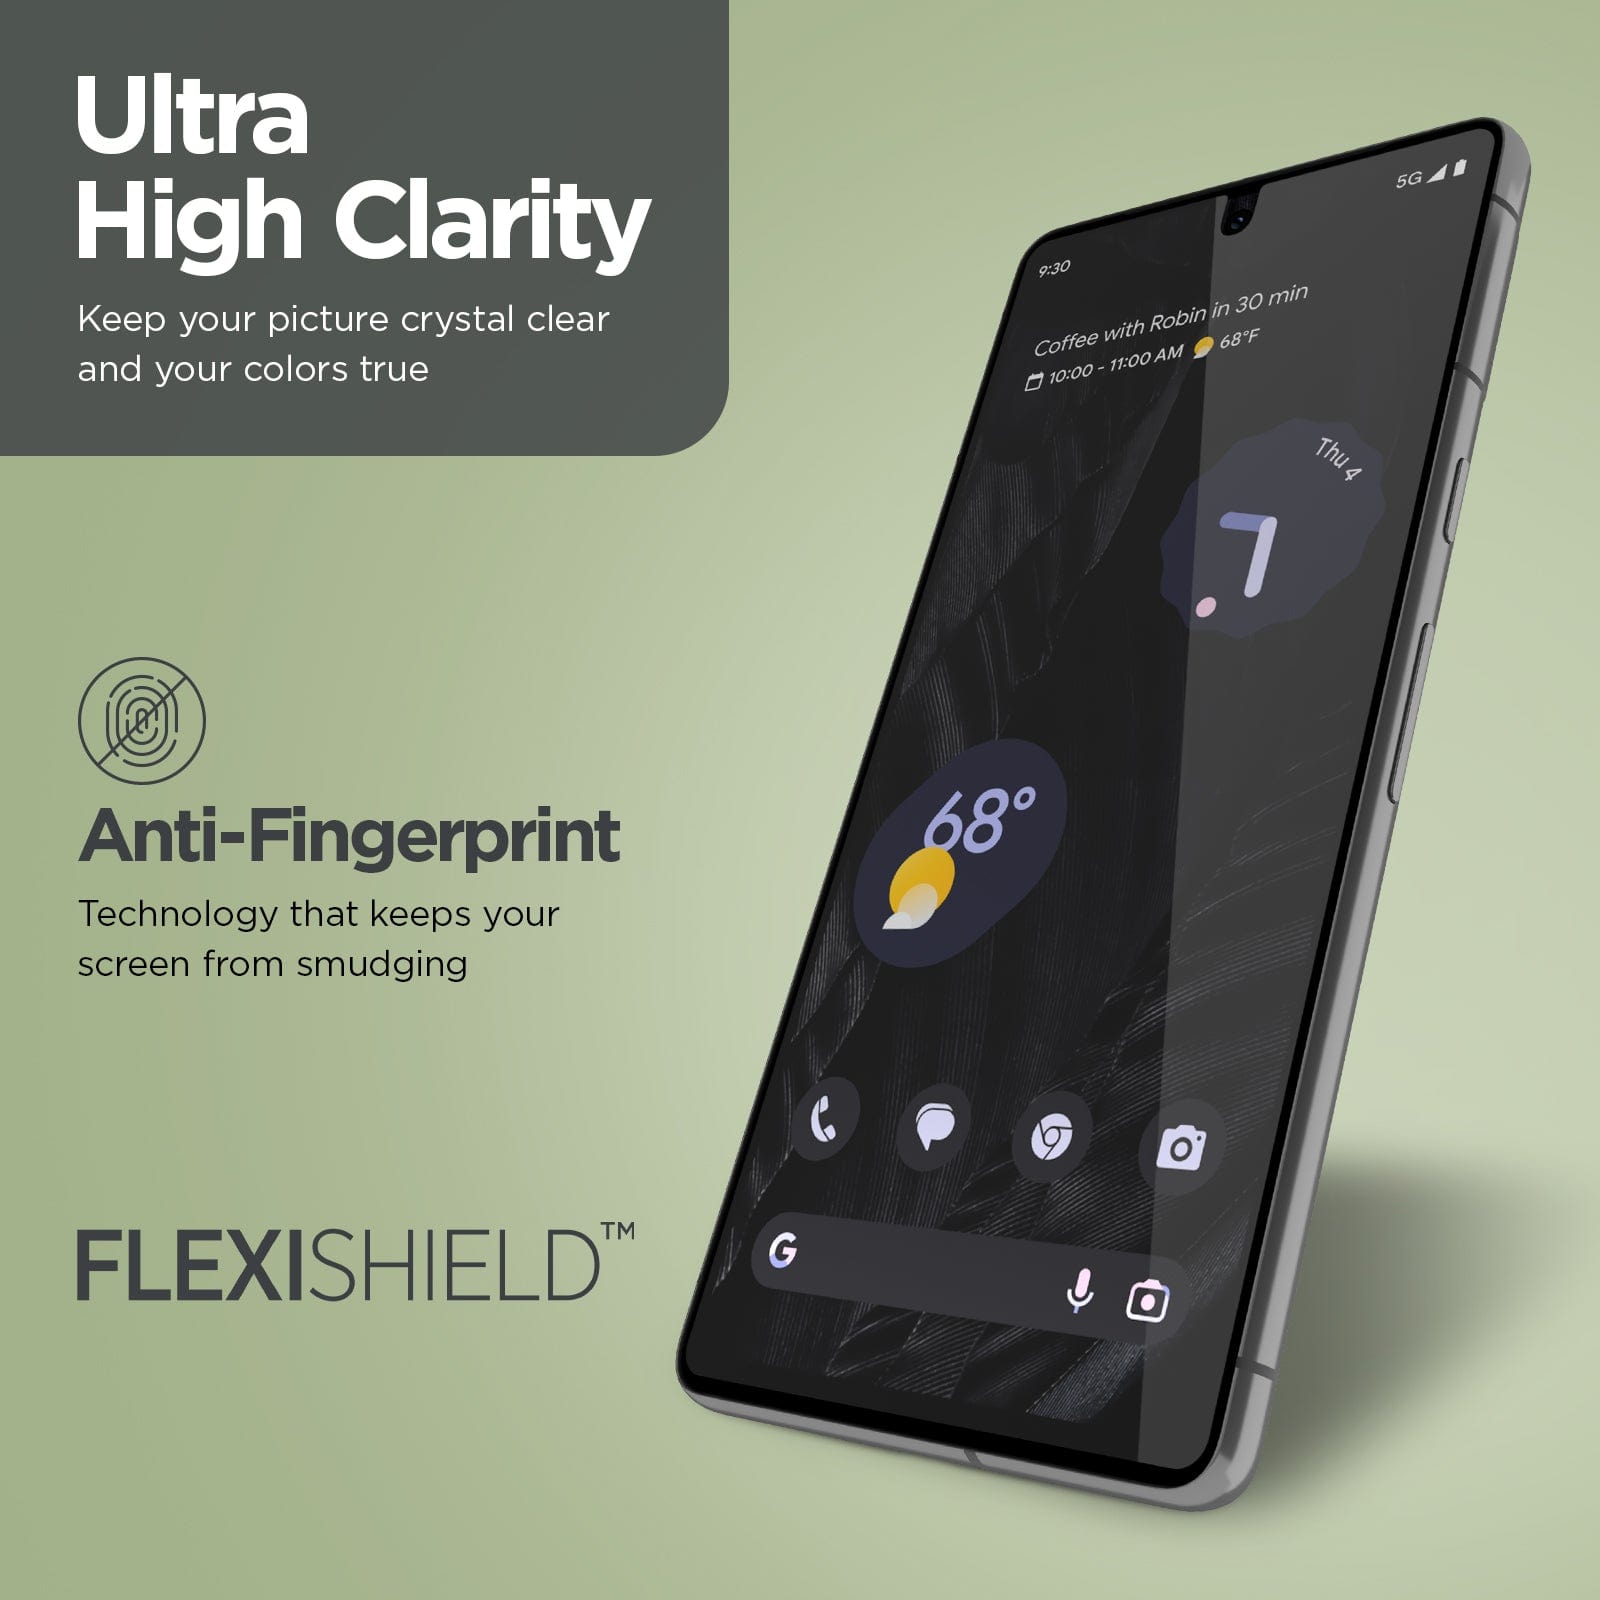 ULTRA HIGH CLARITY. KEEP YOUR PICTUR CRYSTAL CLEAR AND KEEP YOUR COLORS TRUE. ANTI-FINGERPRINT TECHNOLOGY THAT KEEPS YOUR SCREEN FROM SMUDGING. FLEXISHIELD TM